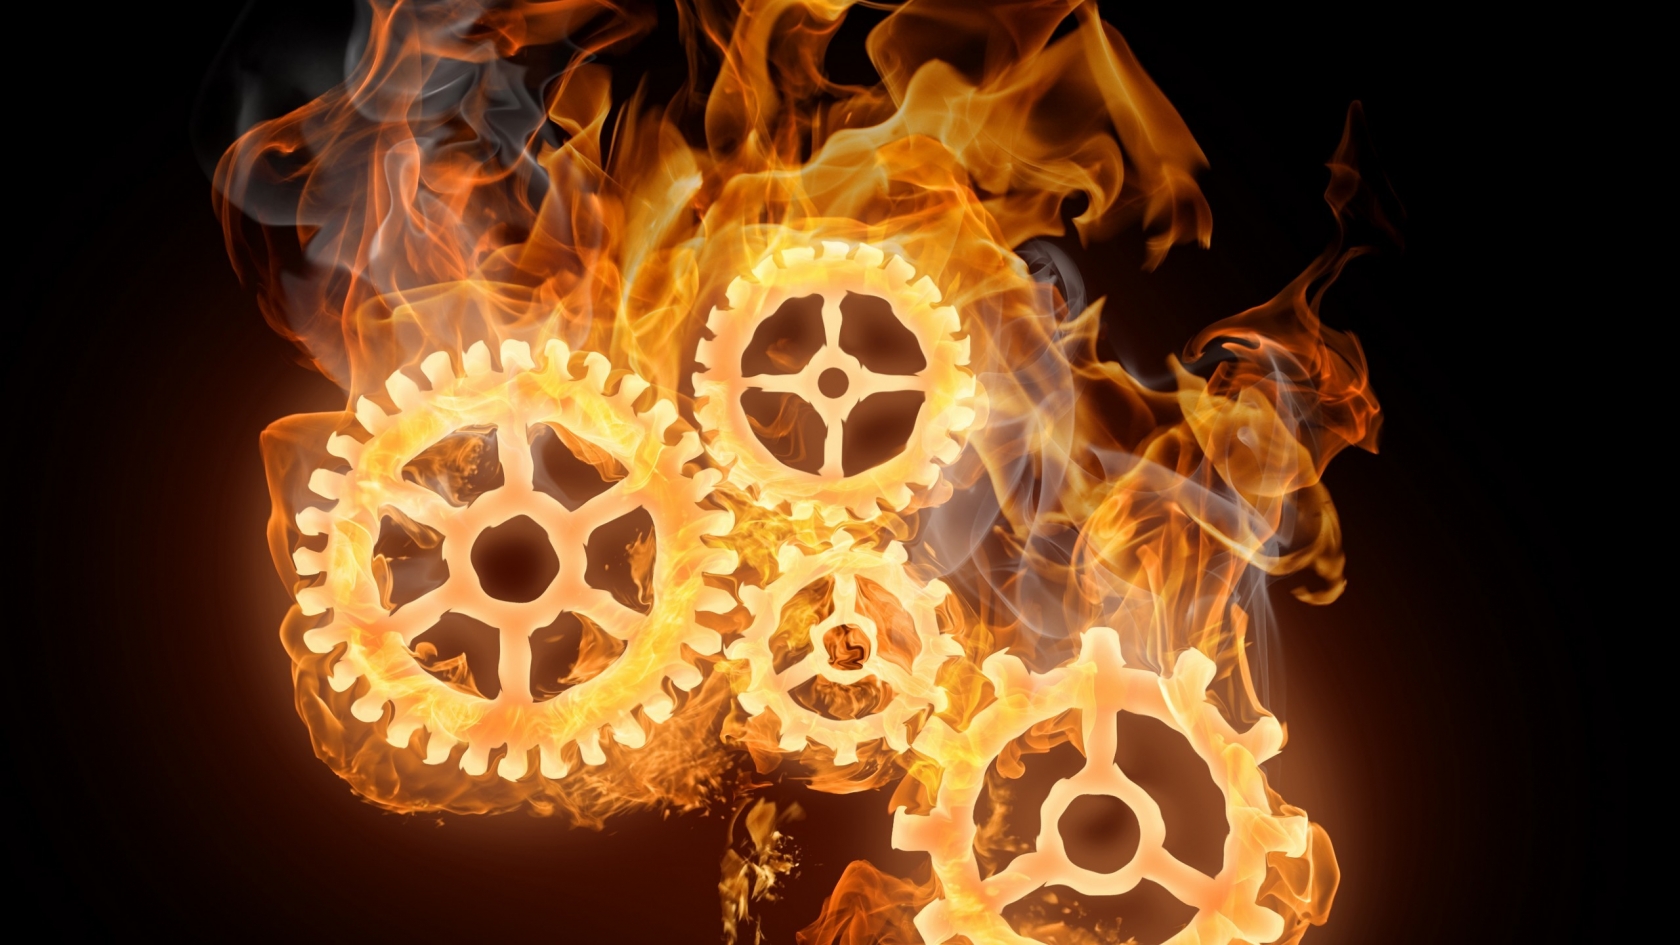 Wheels on Fire for 1680 x 945 HDTV resolution